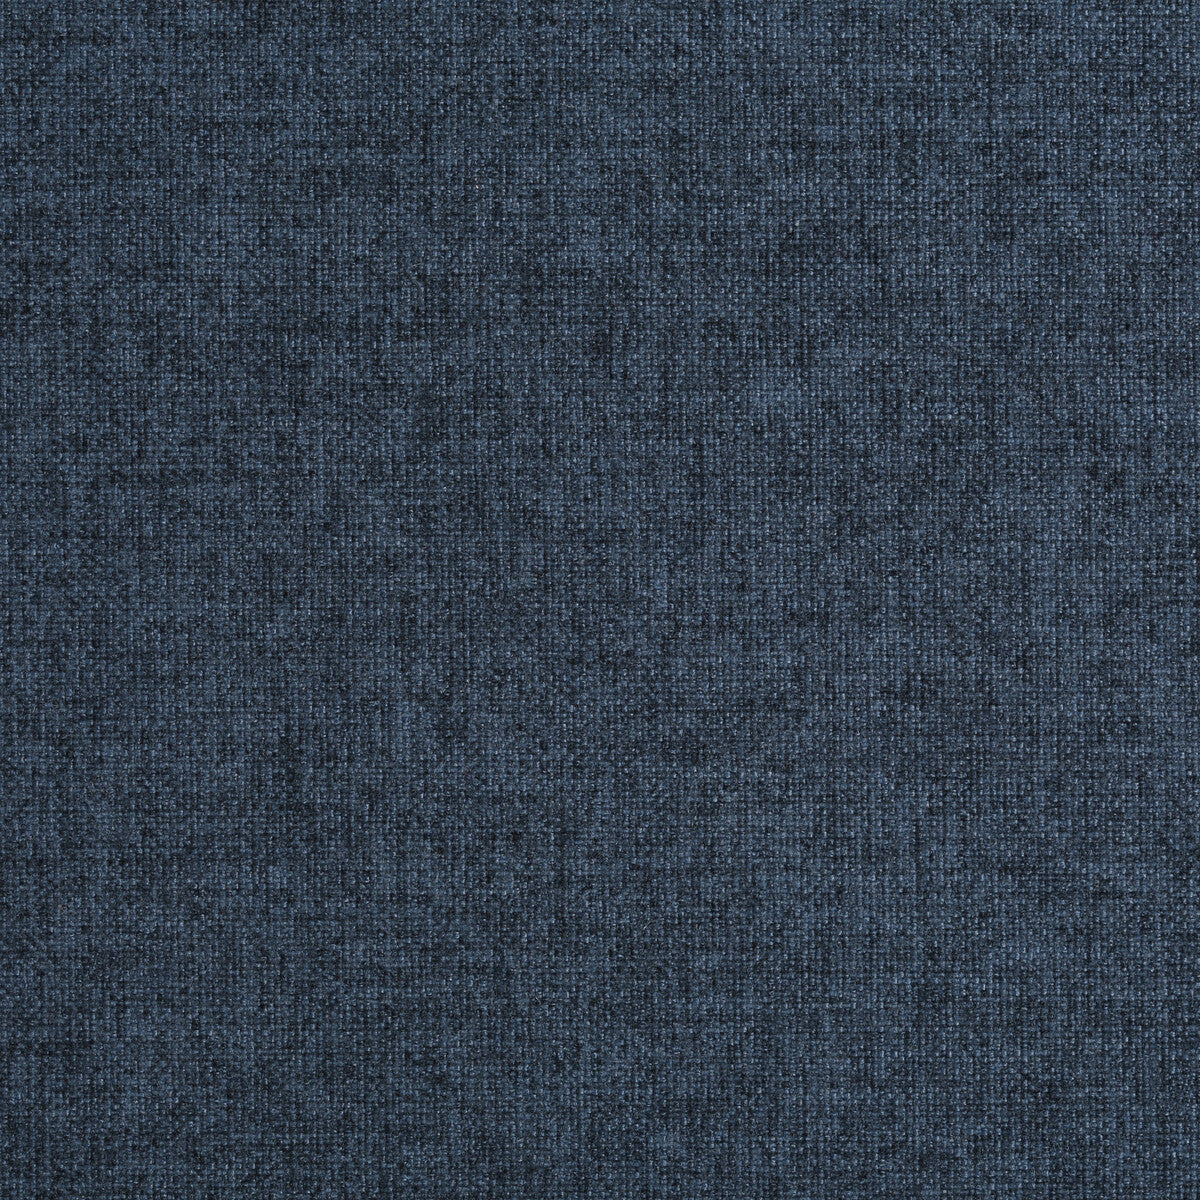 Kravet Smart fabric in 35121-5 color - pattern 35121.5.0 - by Kravet Smart in the Performance Crypton Home collection